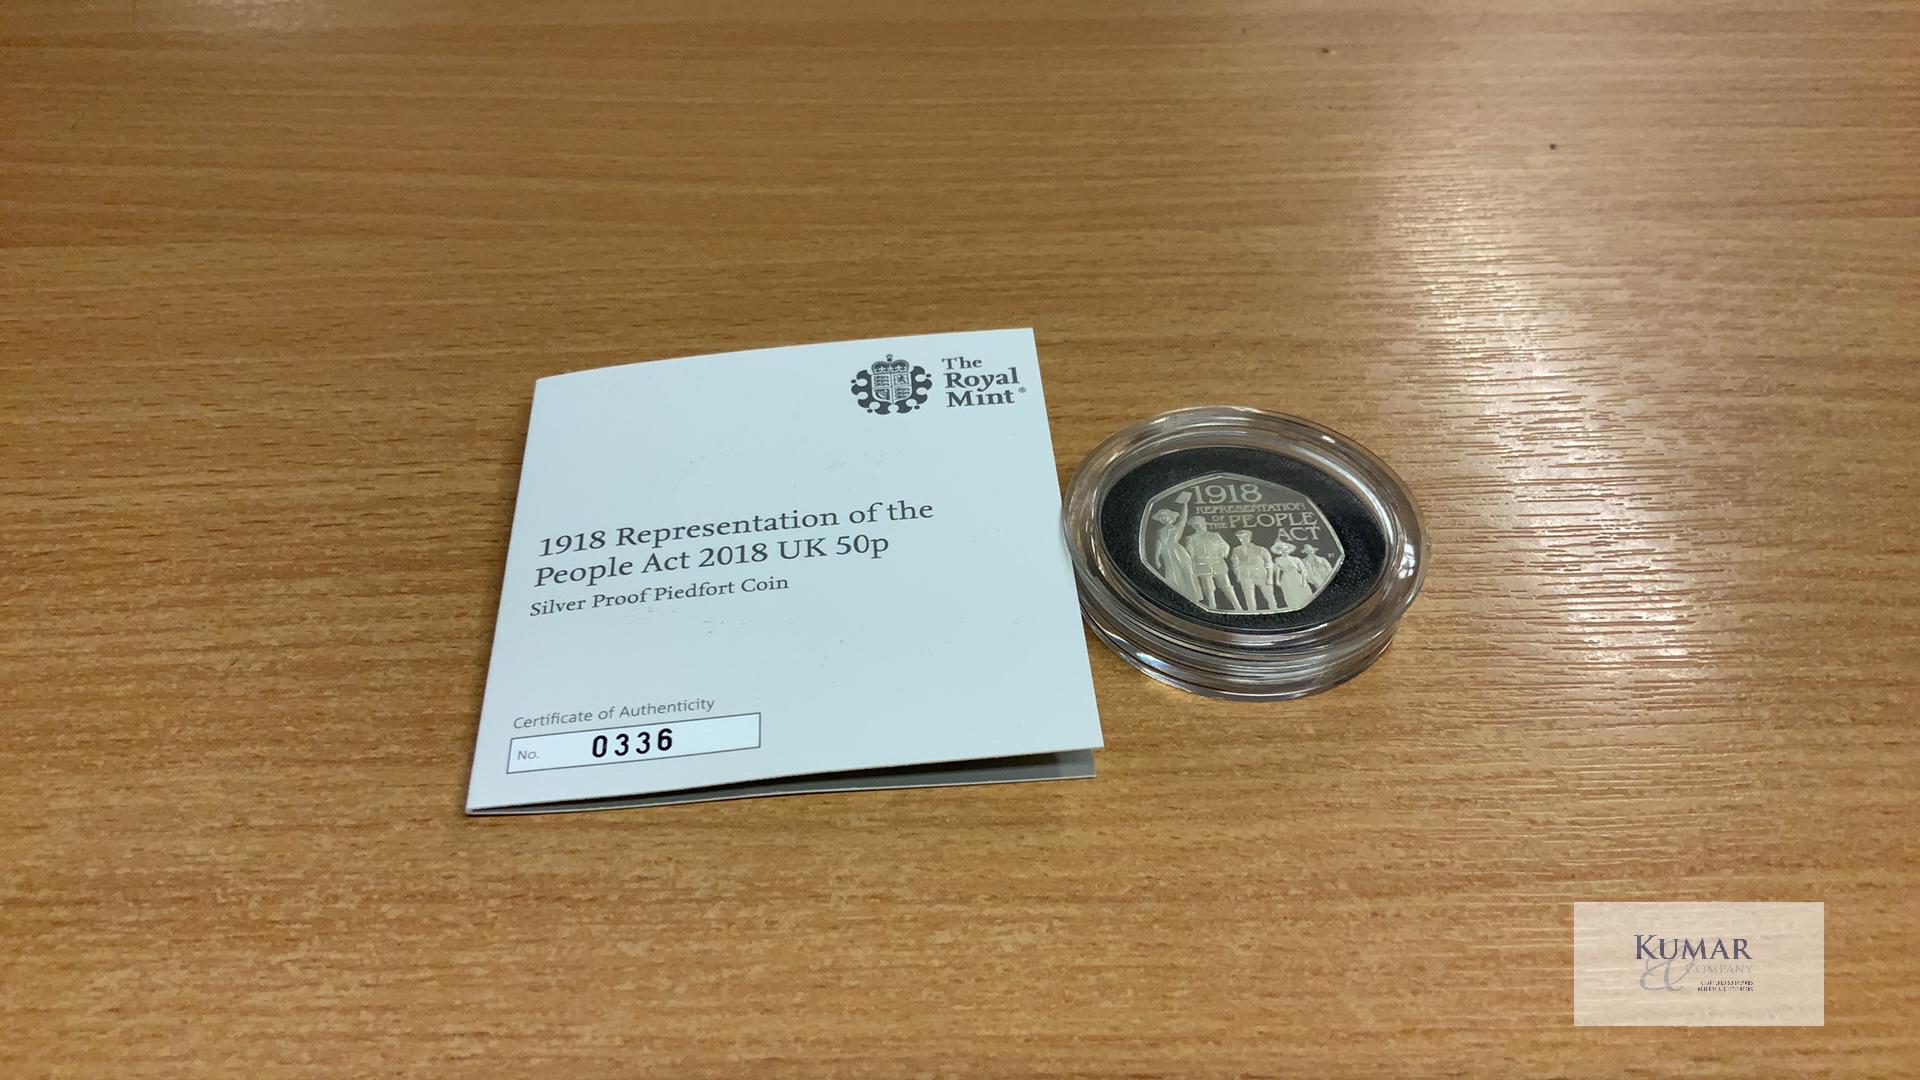 The Royal Mint Coin- An Act to Unite 1918 Representation of the People Act 2018 2018 UK 50p Silver - Image 3 of 4